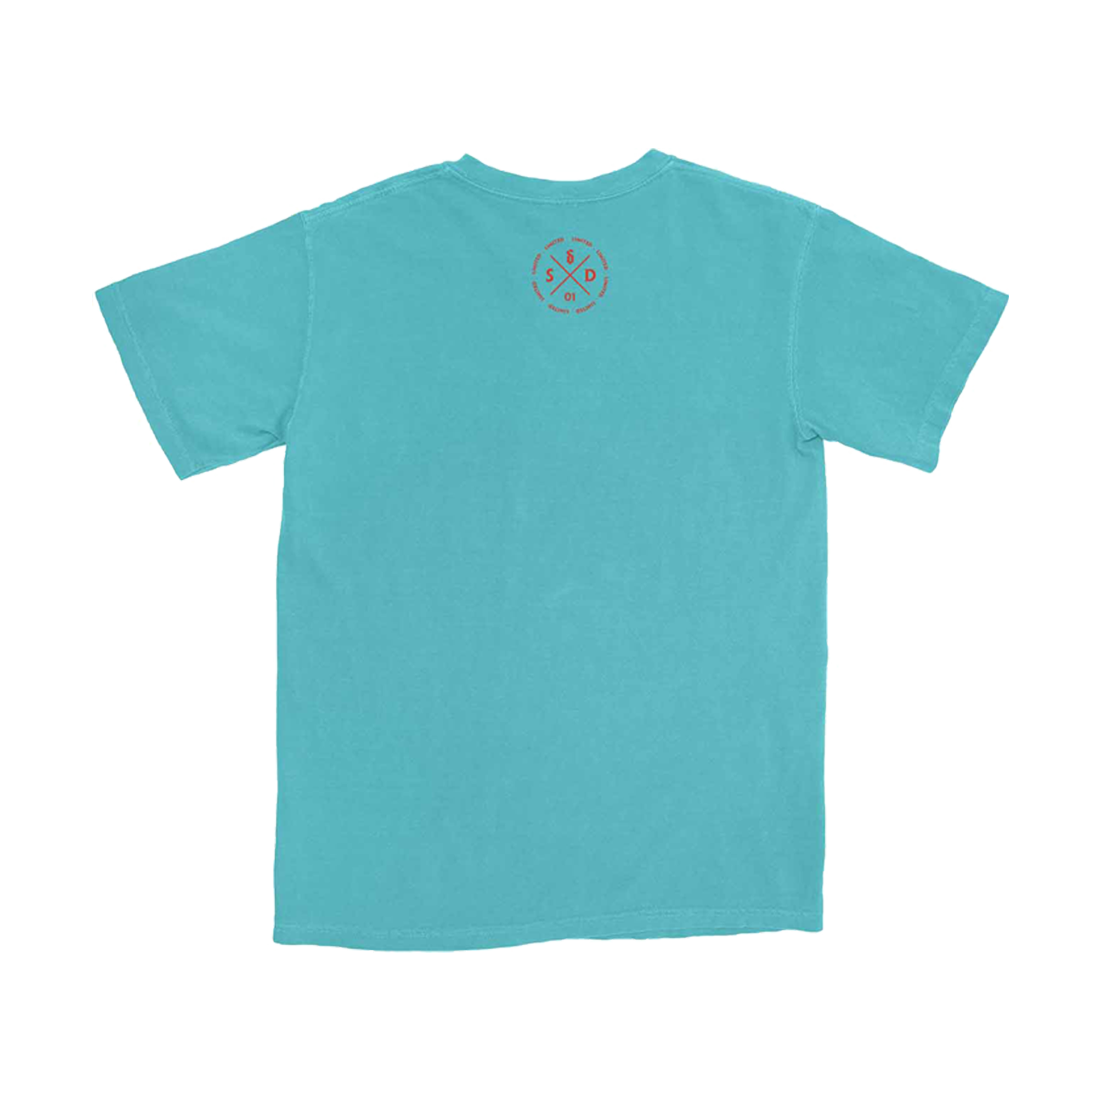 Sound of Madness T-Shirt (Turquoise)